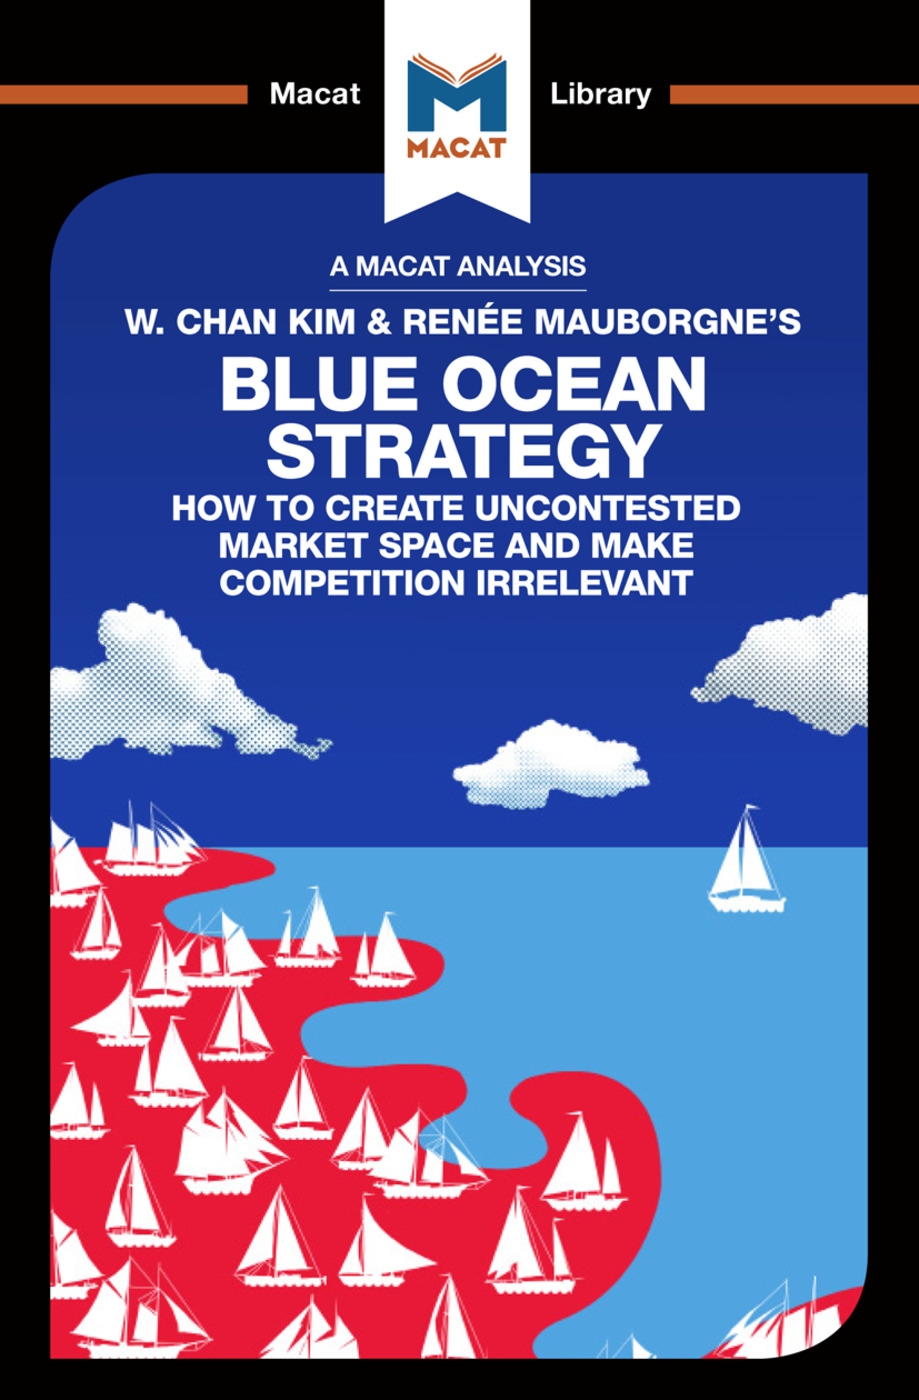 Blue Ocean Strategy: How to Create Uncontested Market Space